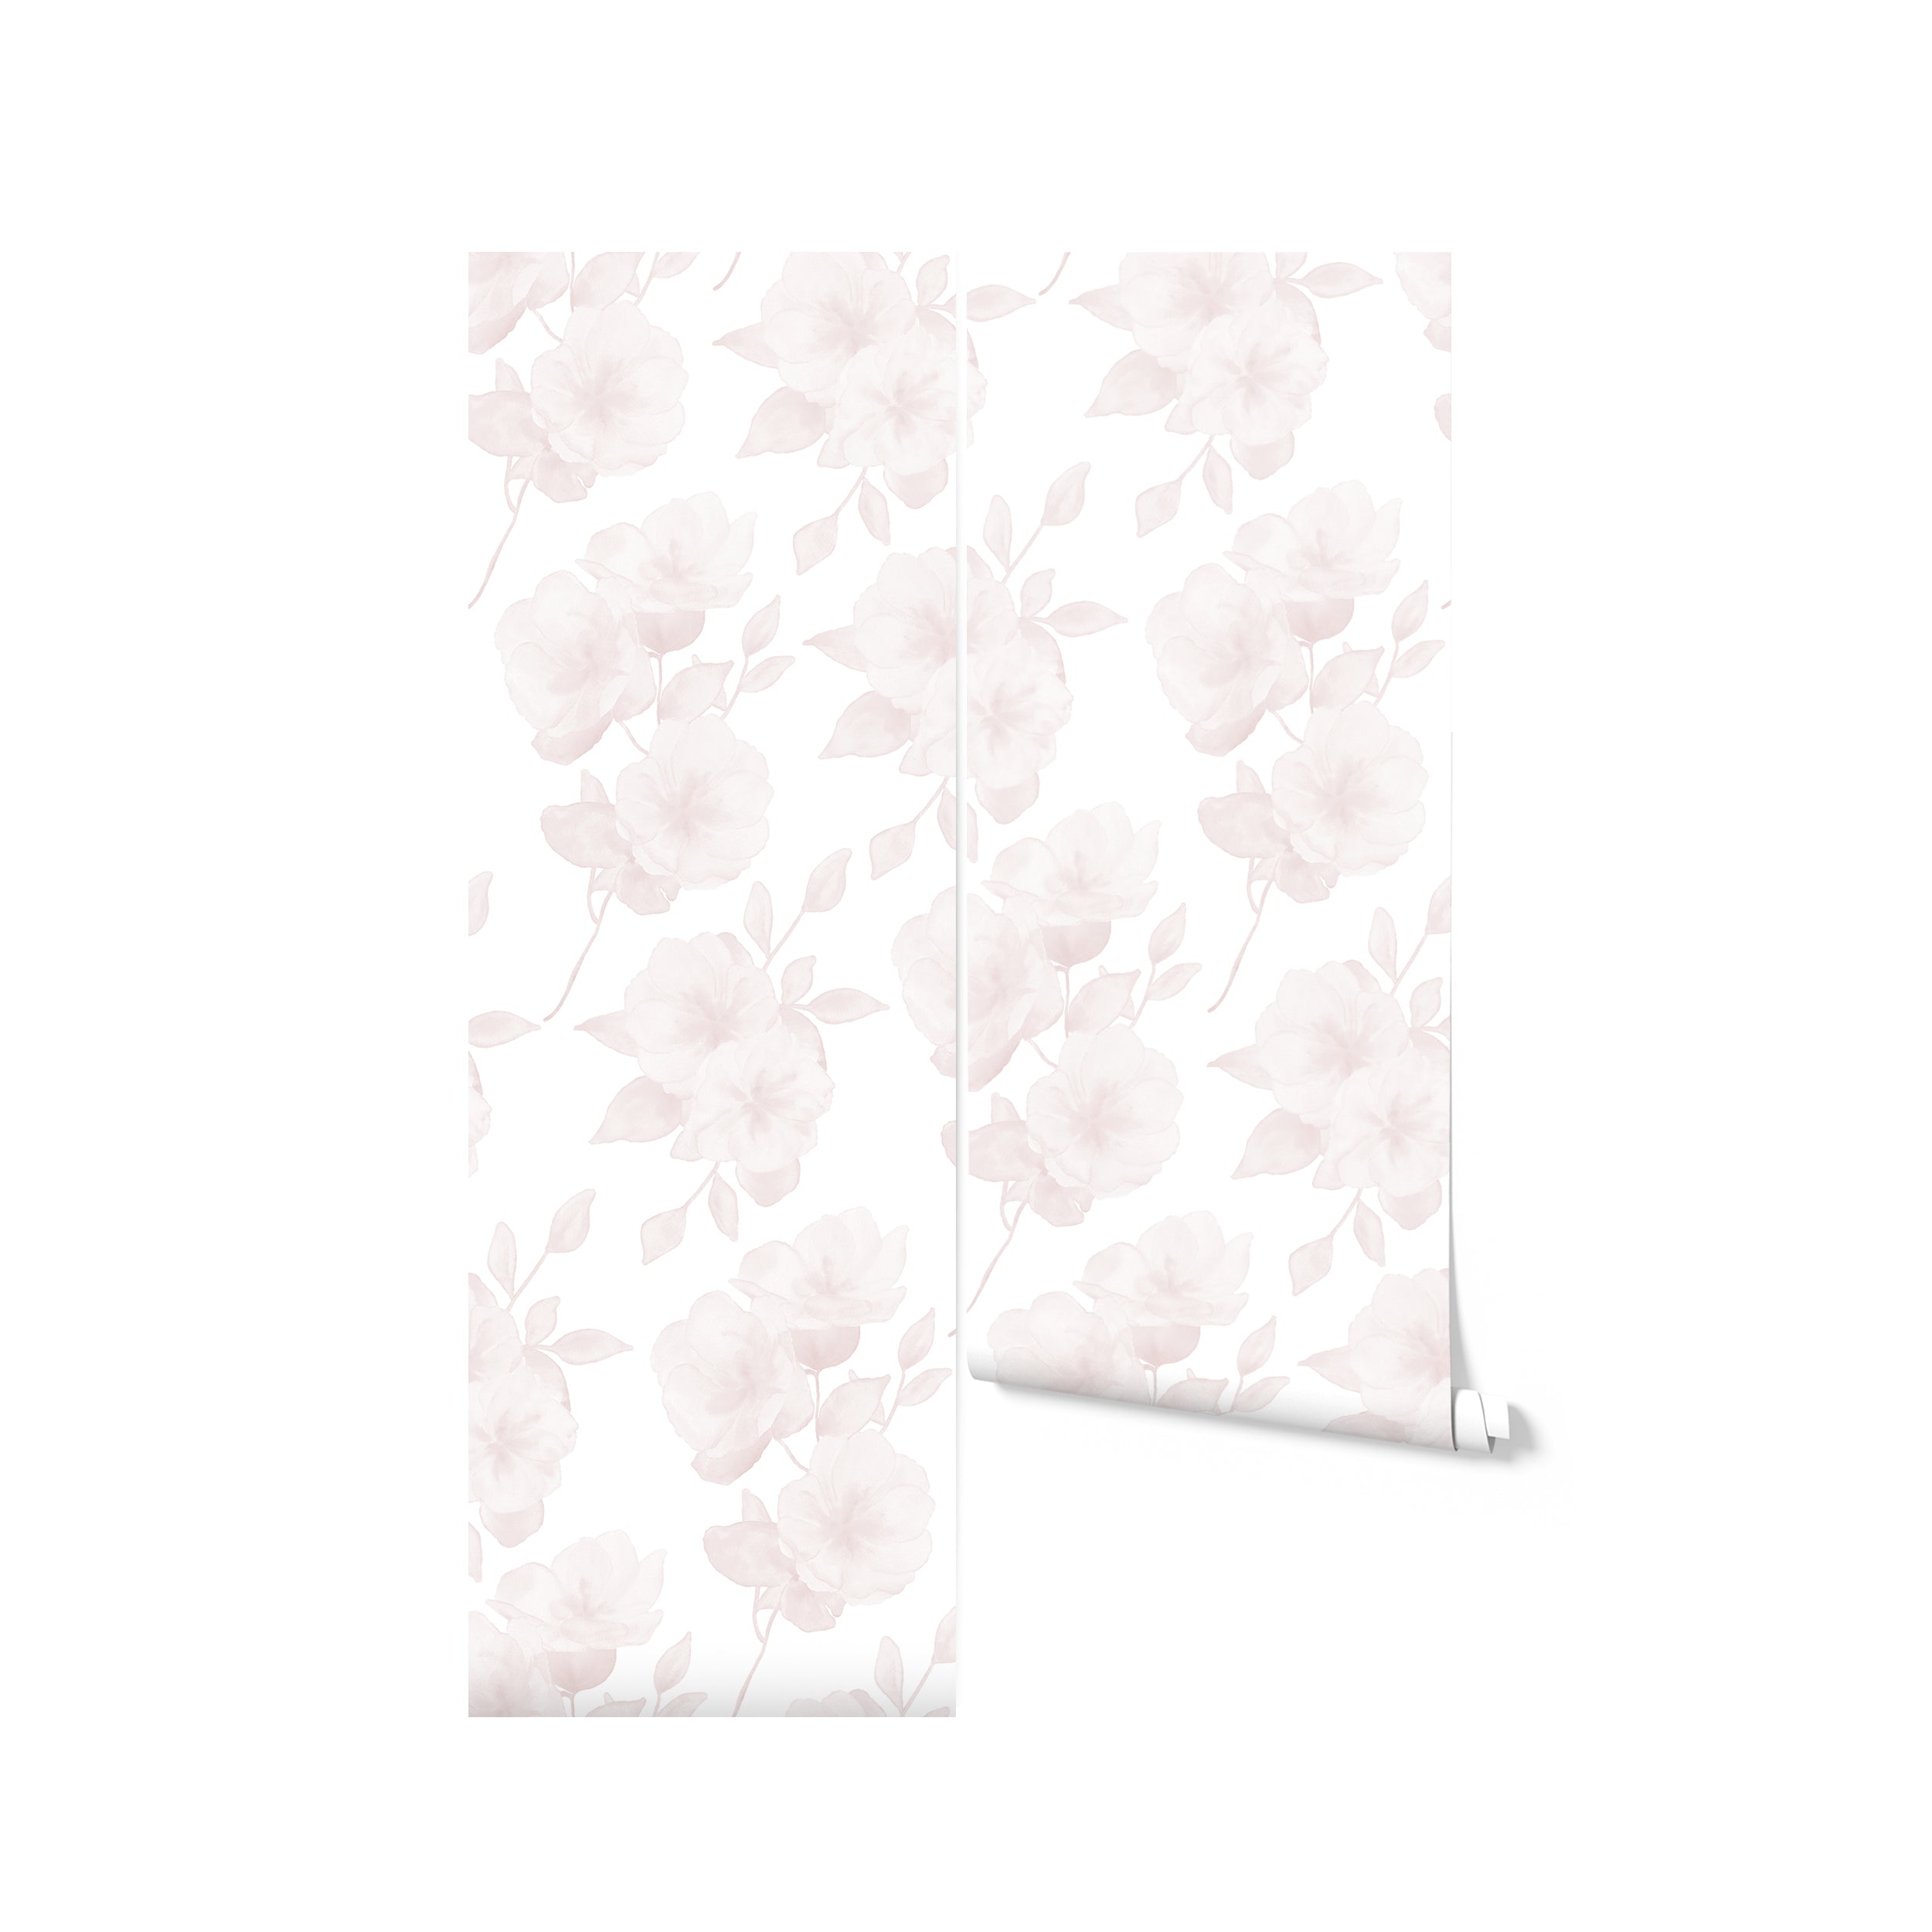 An image displaying a roll of Minimal Floral Wallpaper V with the design of light pink watercolor flowers and leaves. The wallpaper roll is partially unrolled, revealing the continuity of the pattern across multiple panels.